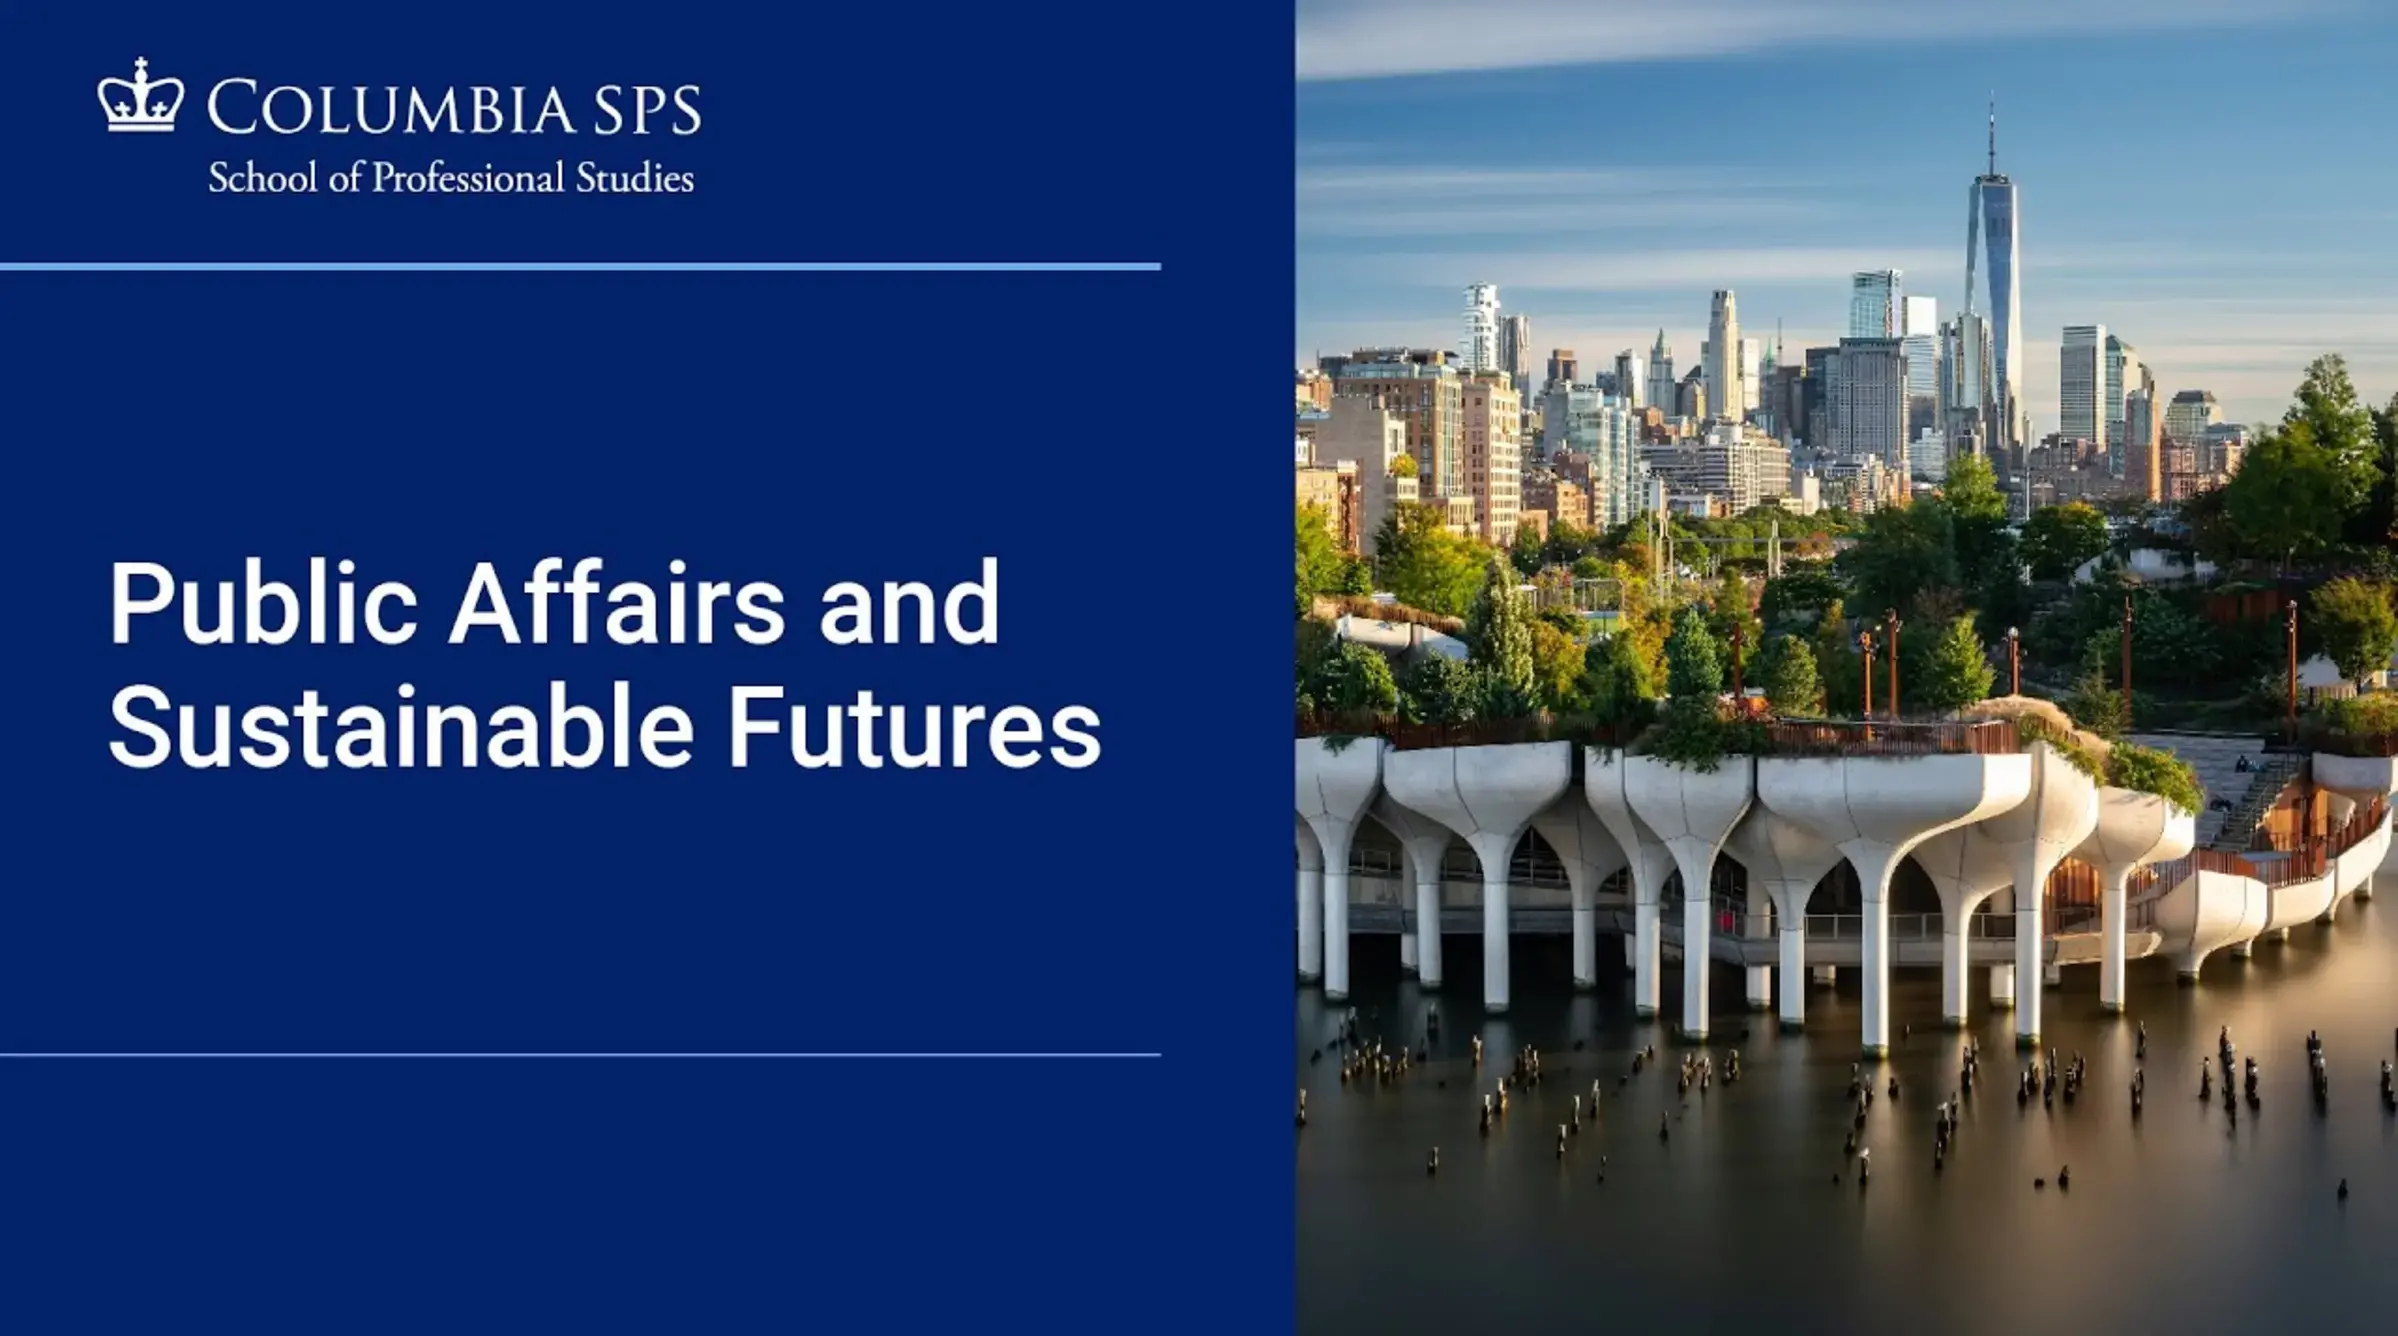 Public Affairs and Sustainable Futures